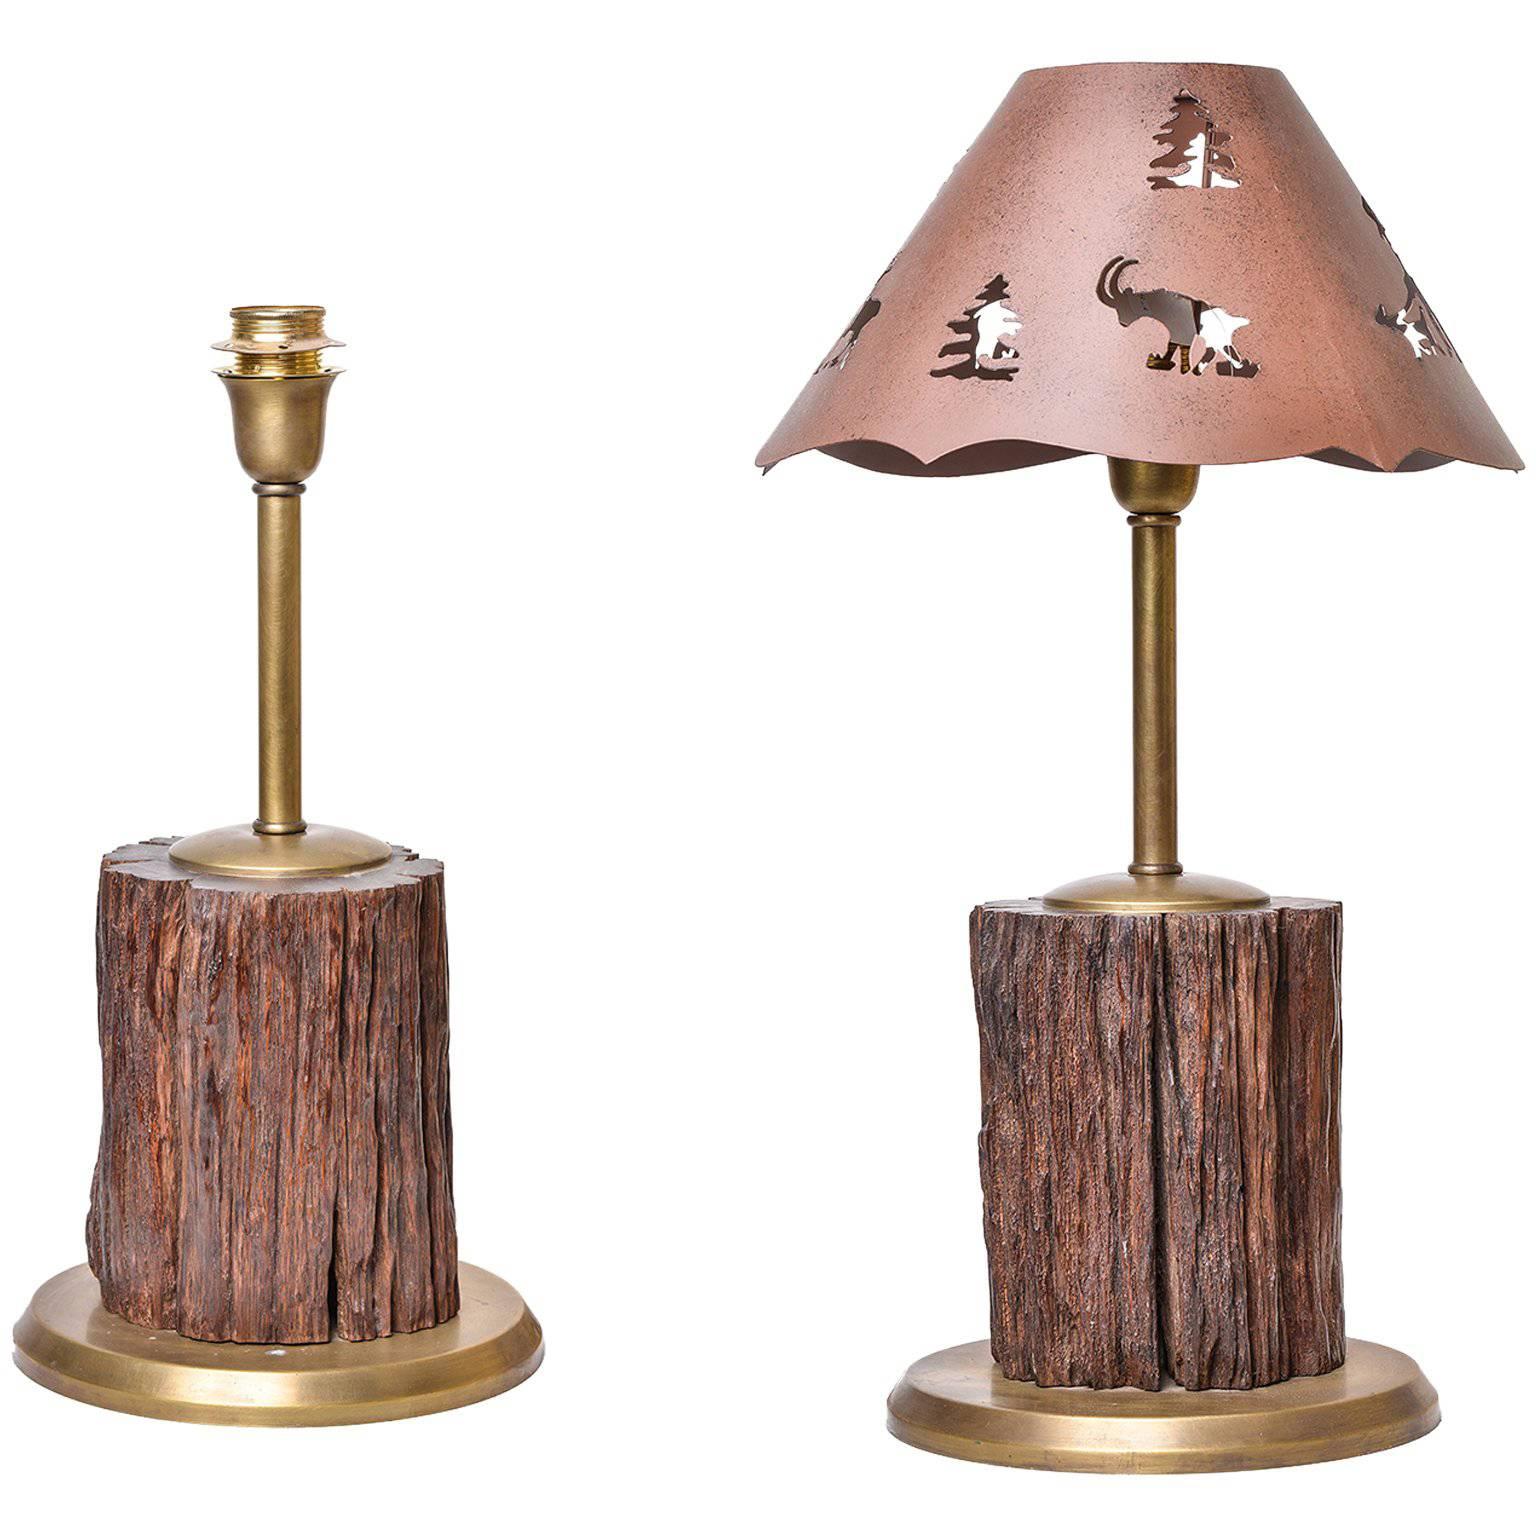  Wood Sculpture Table Lamps for a Mountain Home